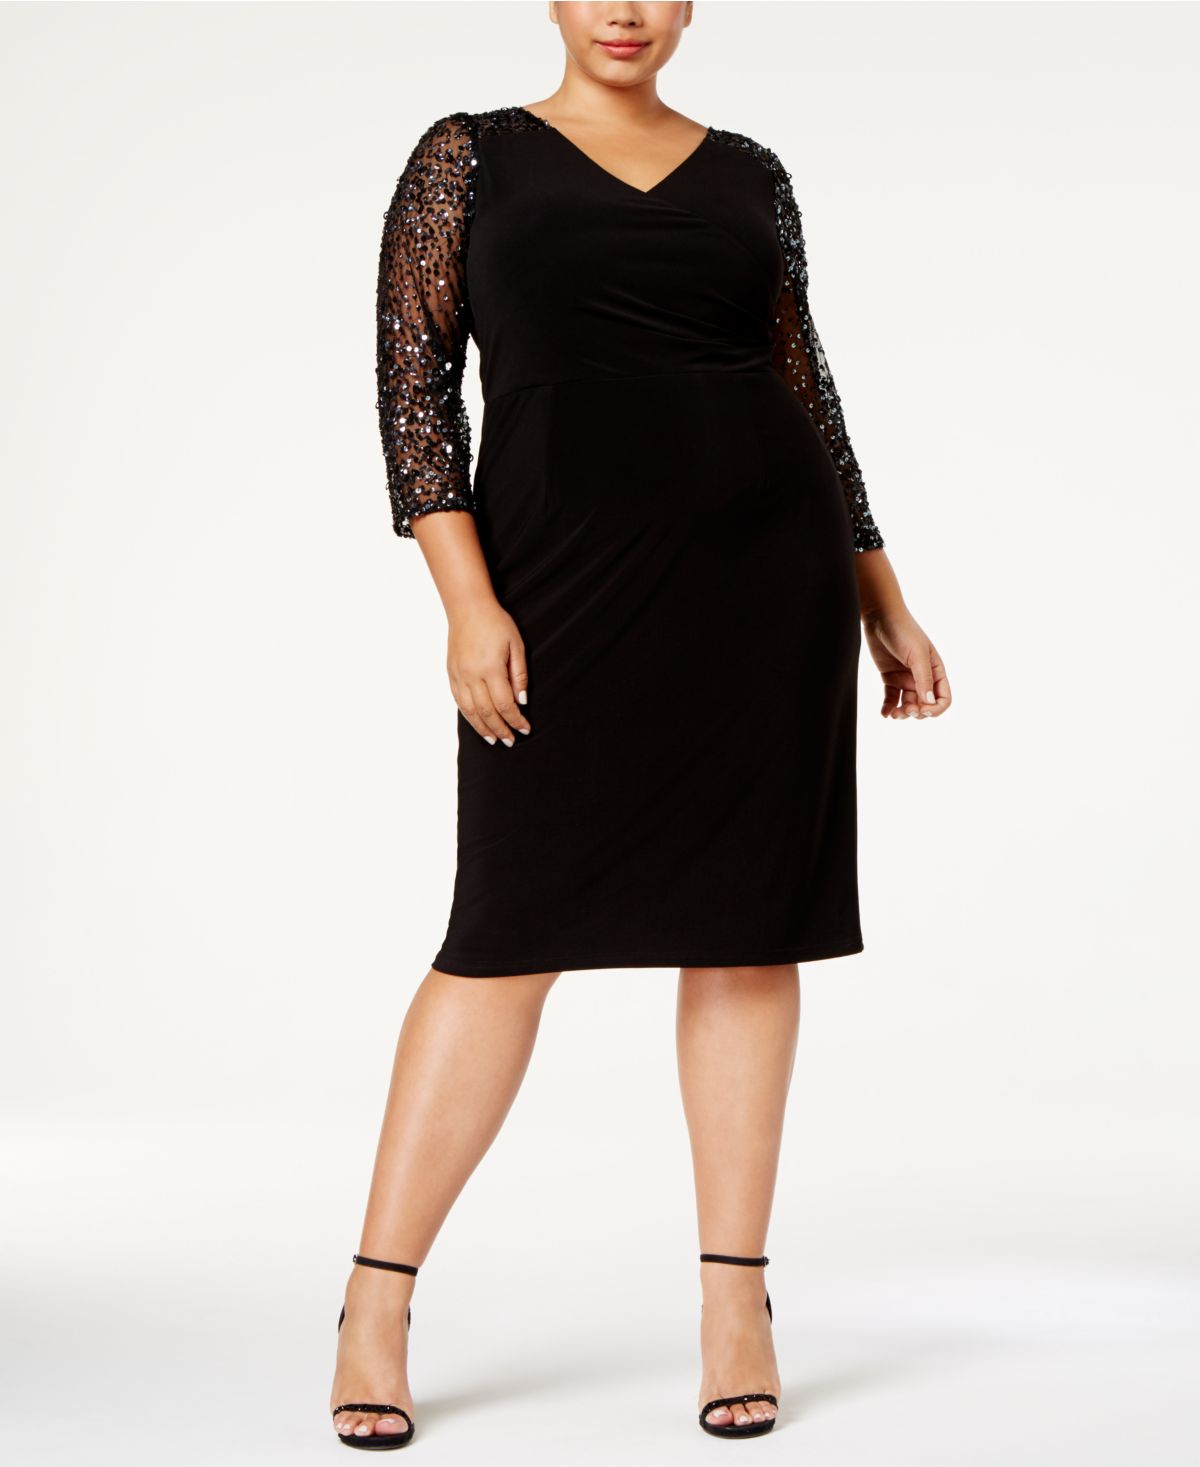 https://www.macys.com/shop/product/adrianna-papell-plus-size-illusion-sleeve-stretch-dress?ID=4901580&CategoryID=37038#fn=sp%3D6%26spc%3D1100%26ruleId%3D87%7CBOOST%20SAVED%20SET%7CBOOST%20ATTRIBUTE%26searchPass%3DmatchNone%26slotId%3D44